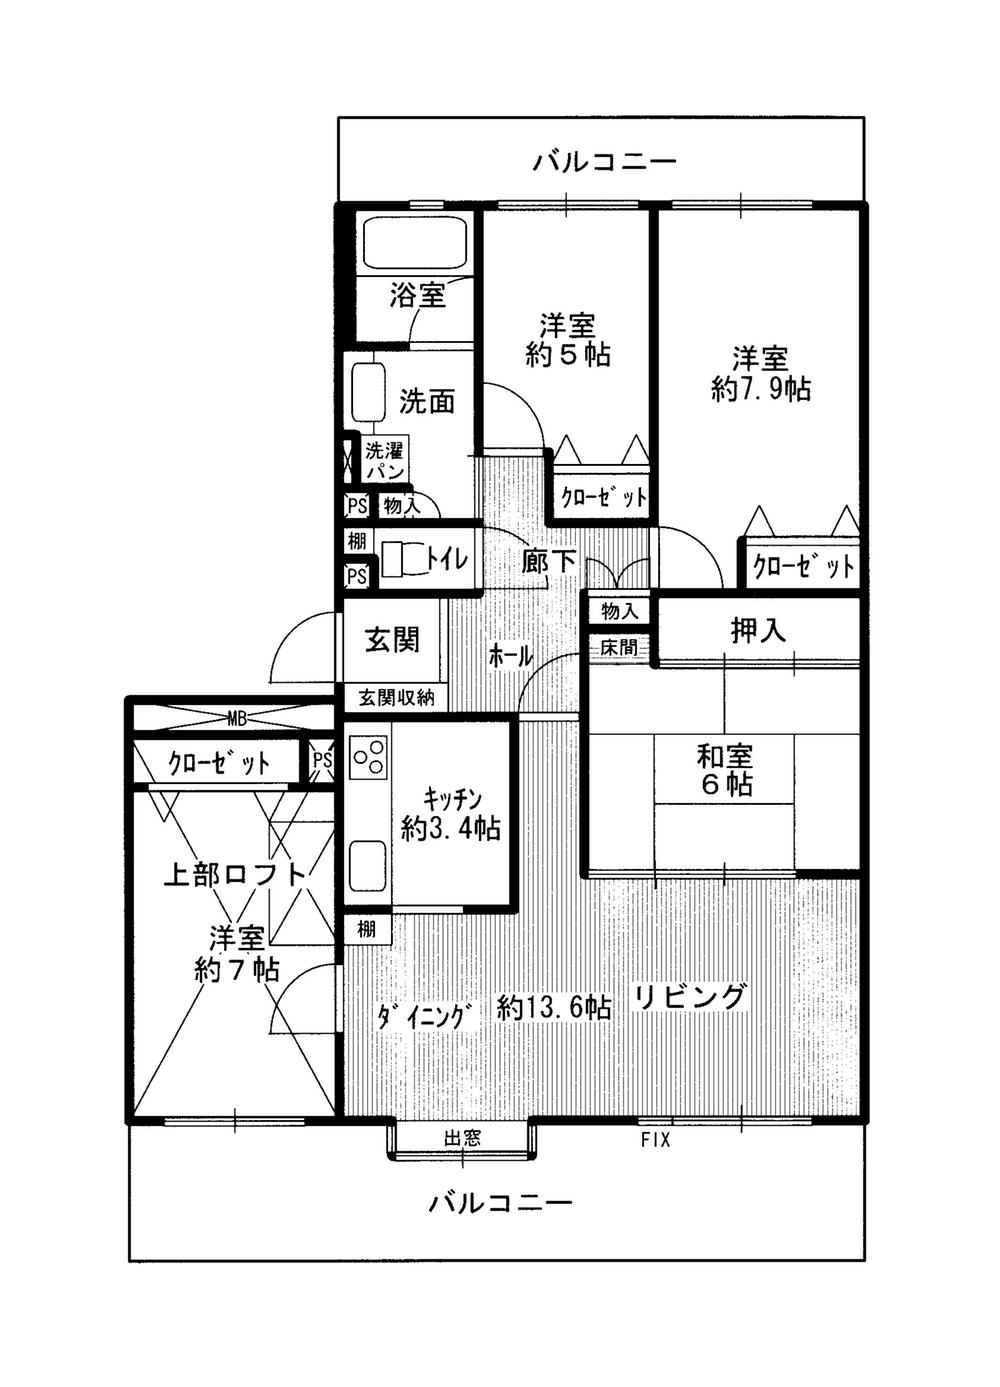 Floor plan. 4LDK, Price 14.5 million yen, Occupied area 95.86 sq m , Balcony area 24.08 sq m floor plan will be to the left and right inversion type.